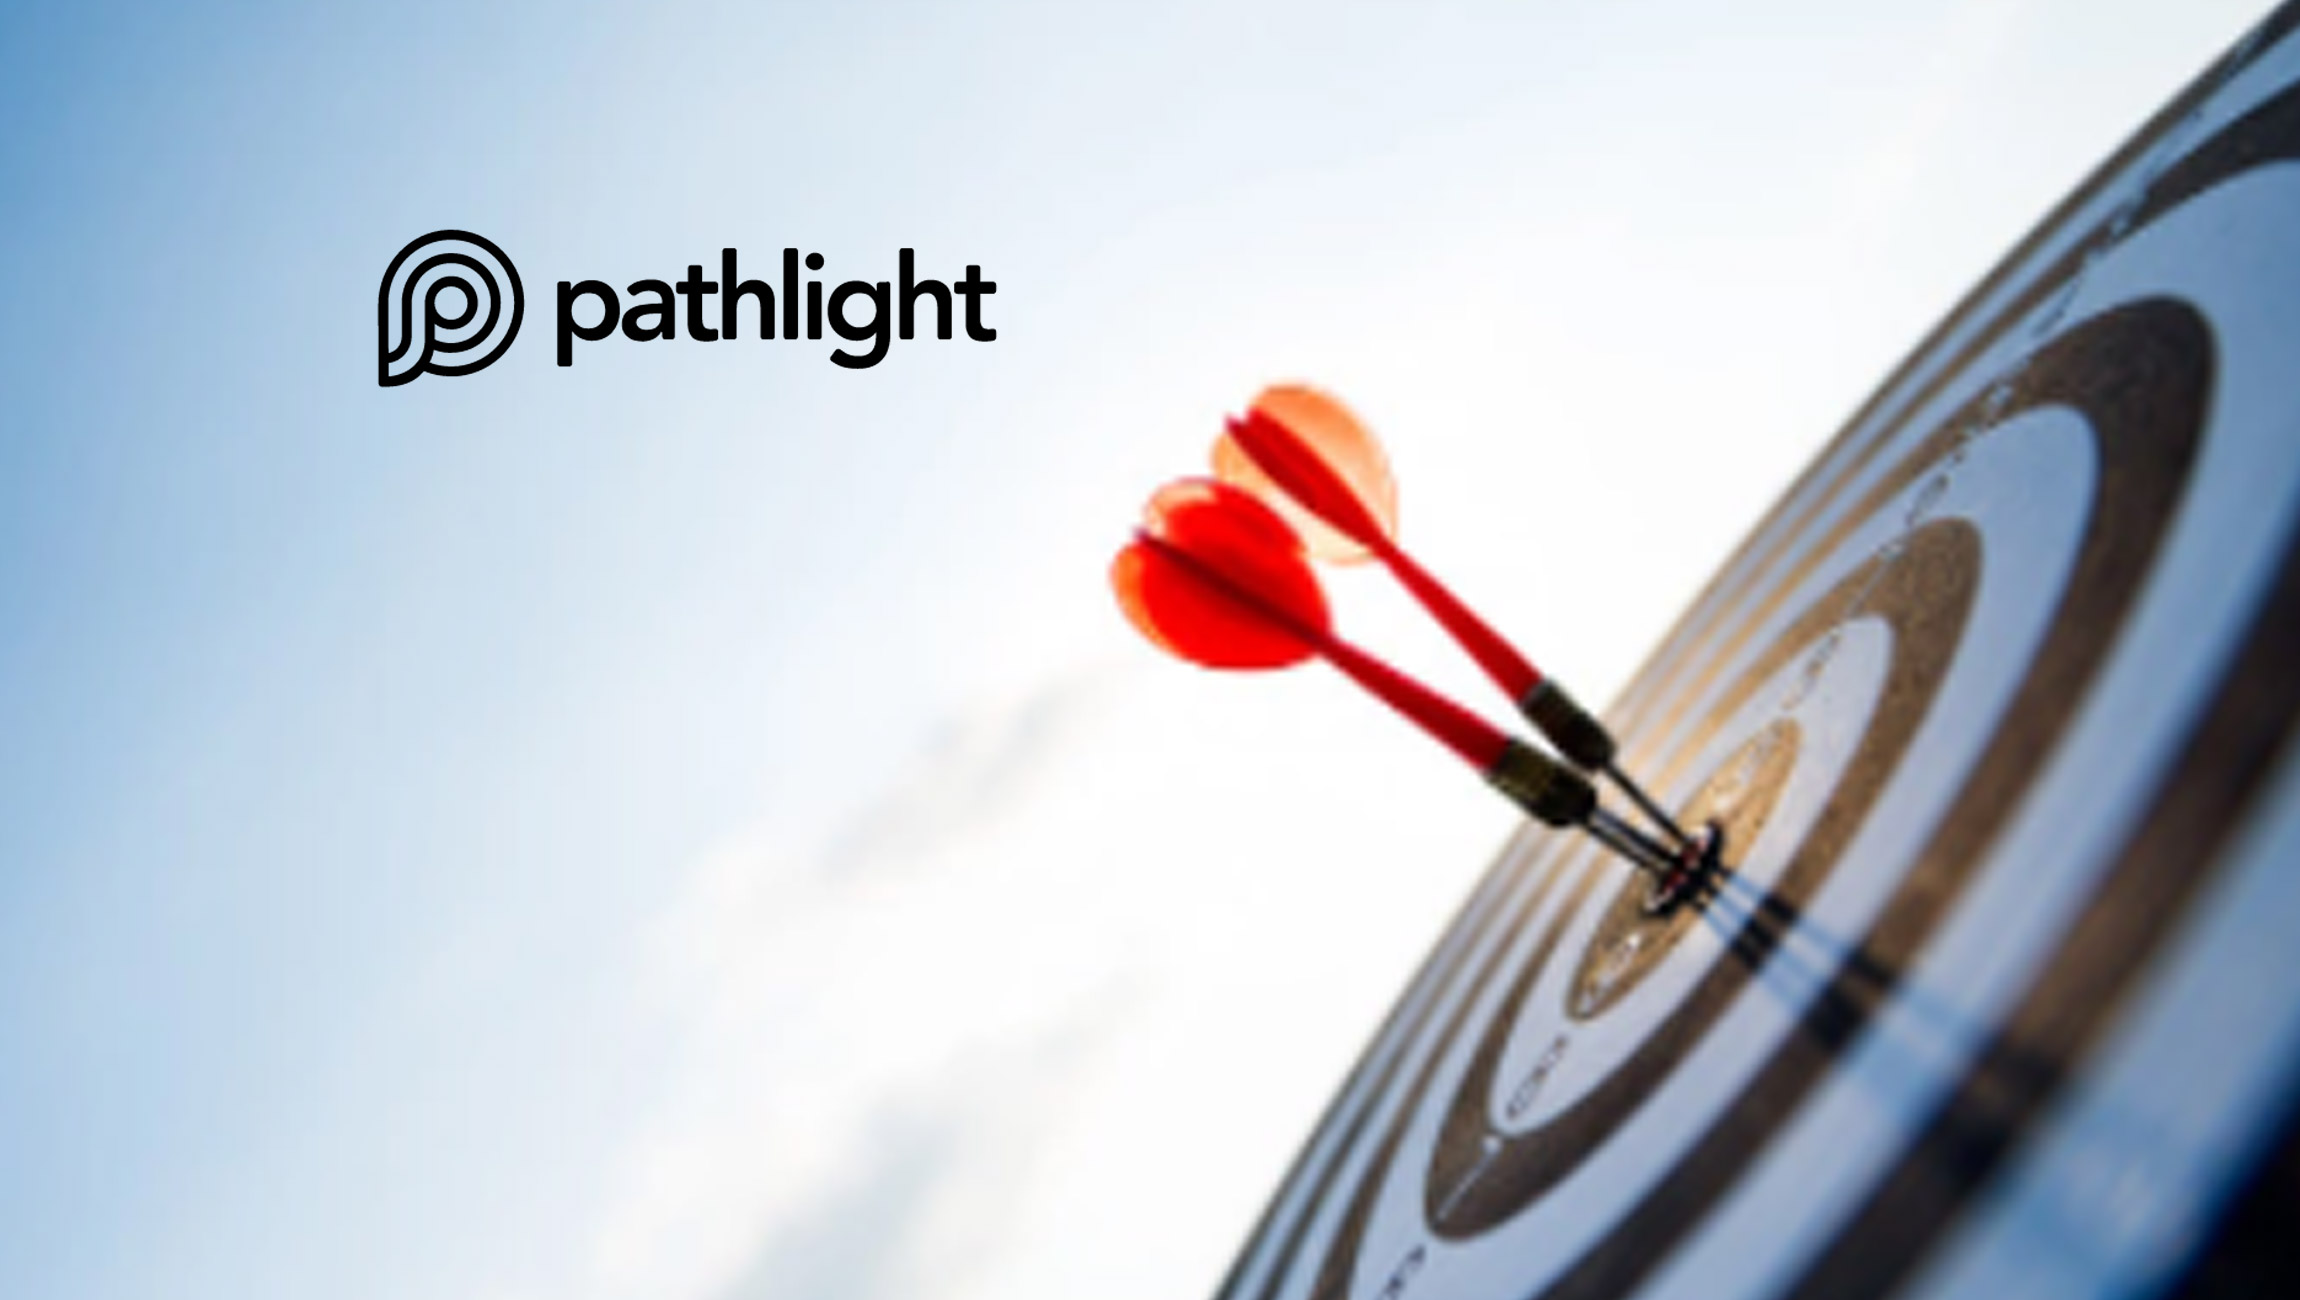 Pathlight-Achieves-Completion-of-SOC-2-Type-I-Certification